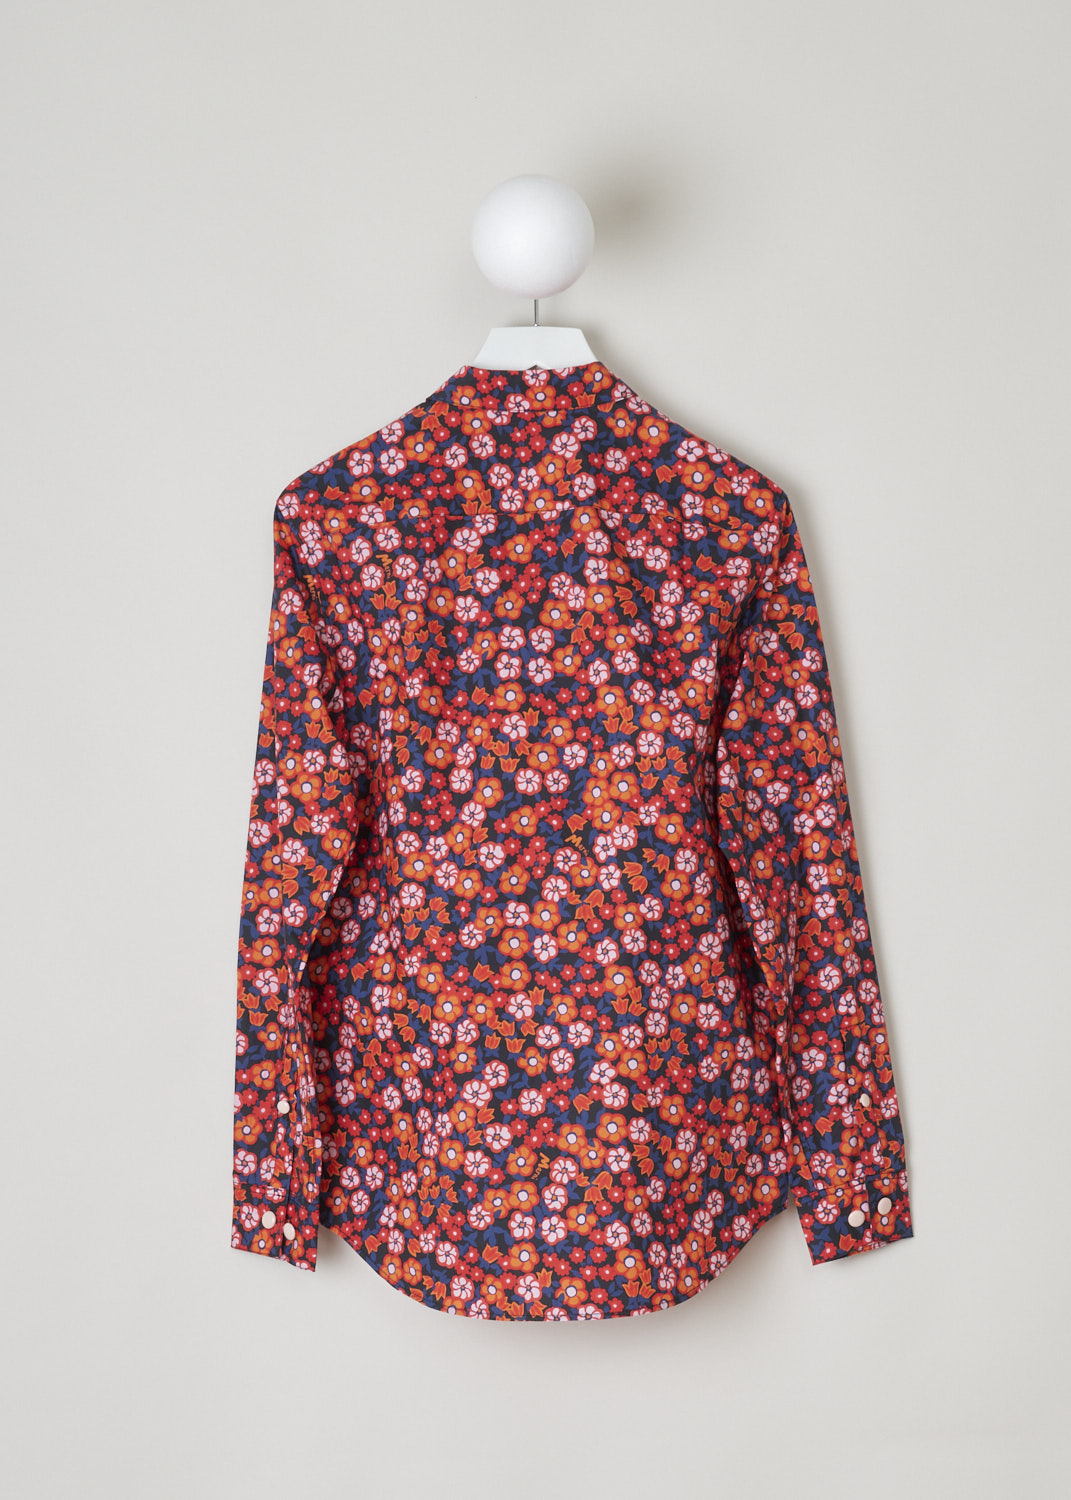 Marni, Red and blue floral blouse, CAMA0403A0_UTCZ54_PGN99, red blue white, back, Spice up your spring with this lovely floral blouse. Designed in a classic blouse model, with the pointed collar and long cuffed sleeves. A unique feature about this model are the buttons, which are called half ball buttons. They have a smooth and round surface.  